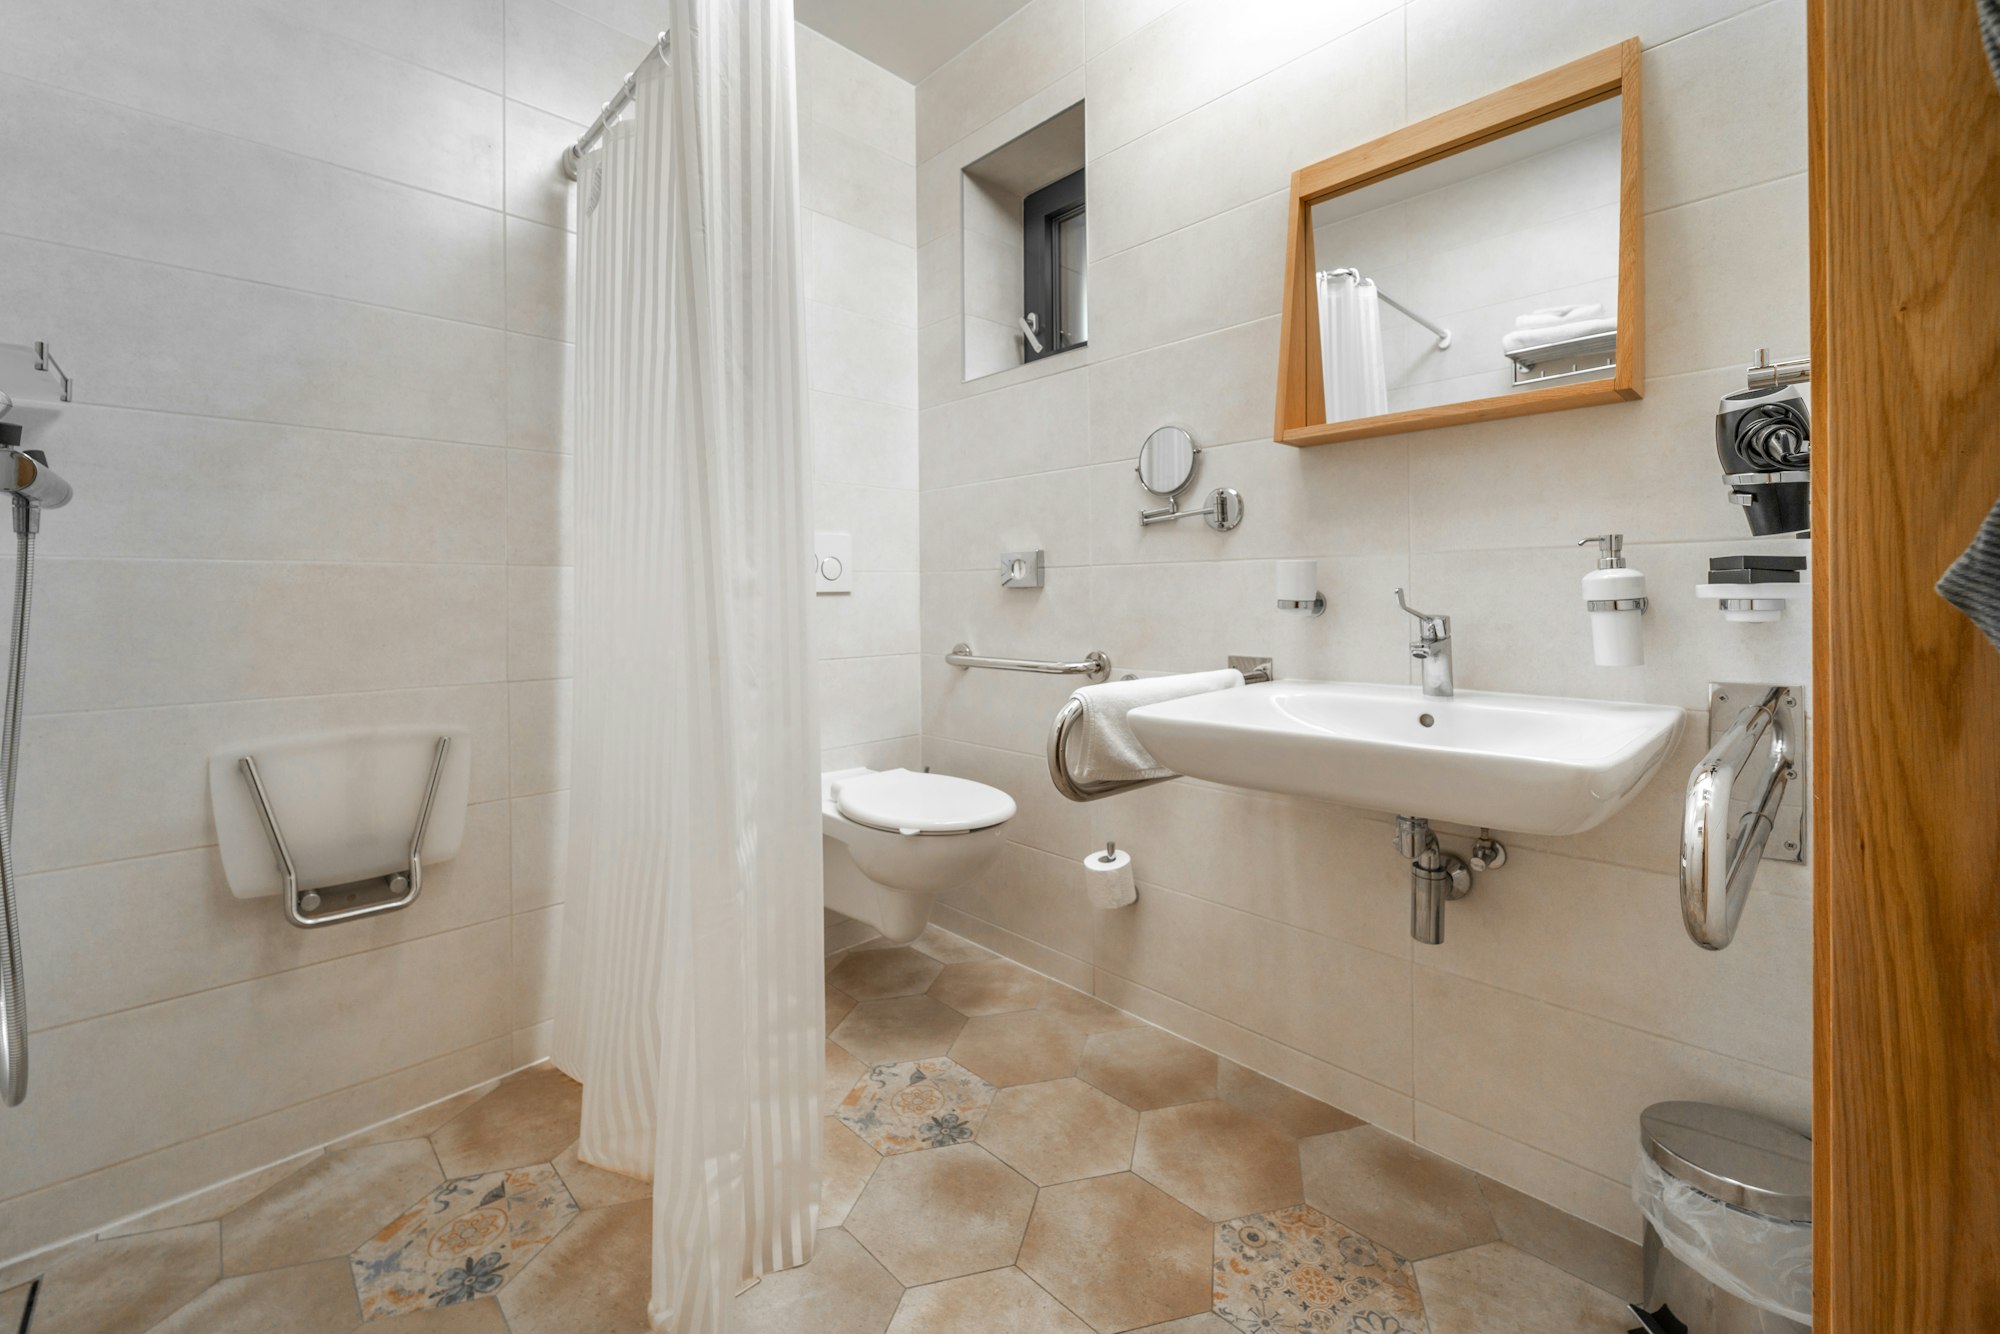 Interior of bathroom for the disabled or elderly people